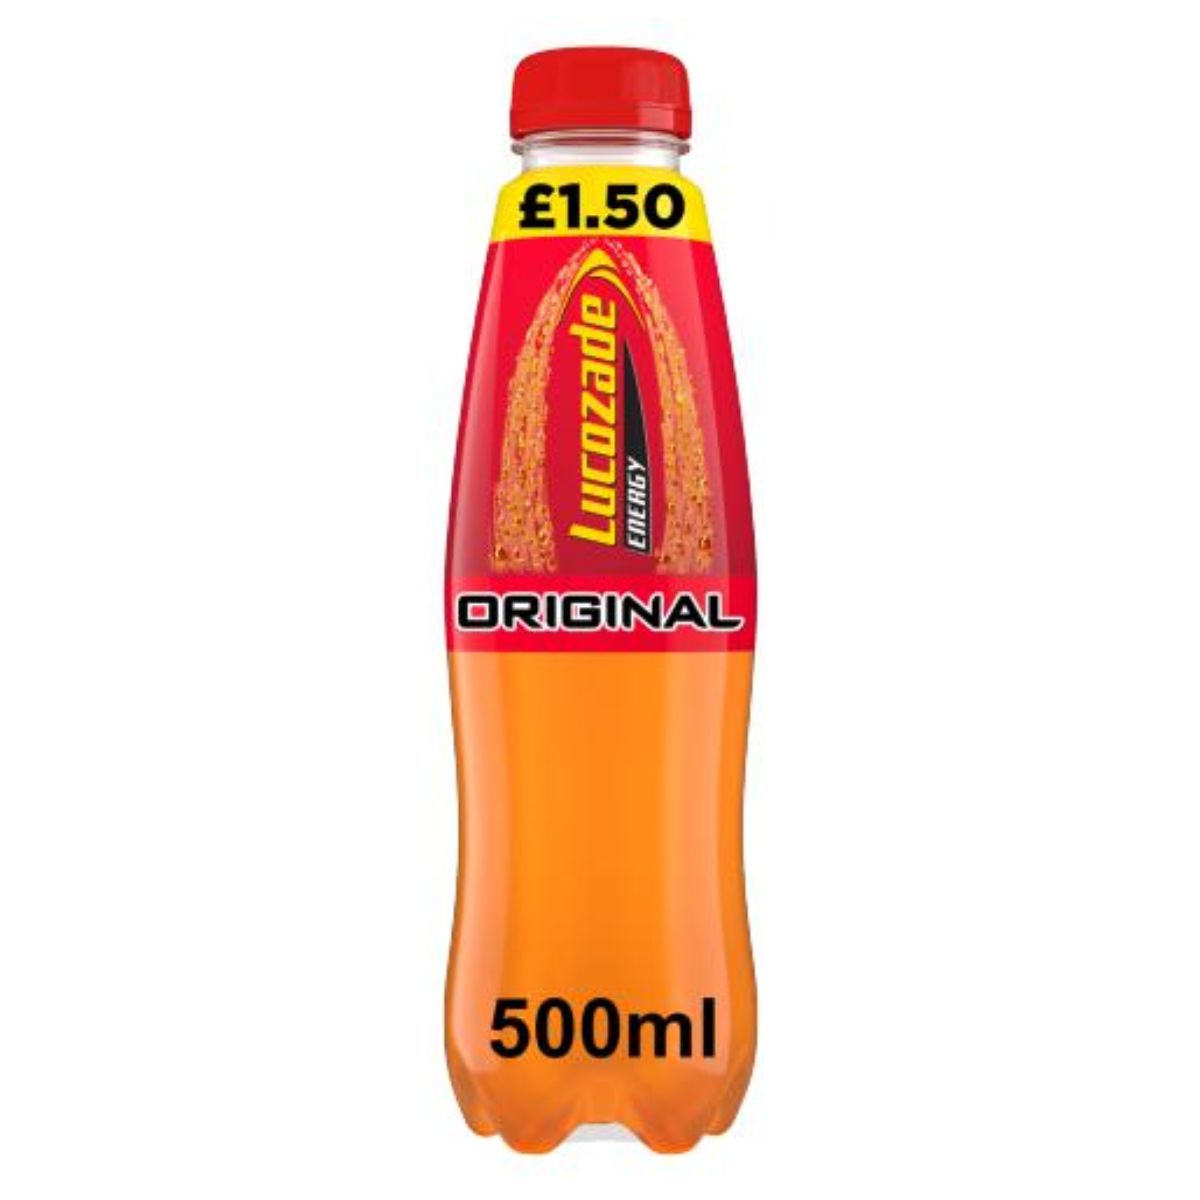 A Lucozade - Energy Drink Original - 500ml bottle with a price tag of £1.50.